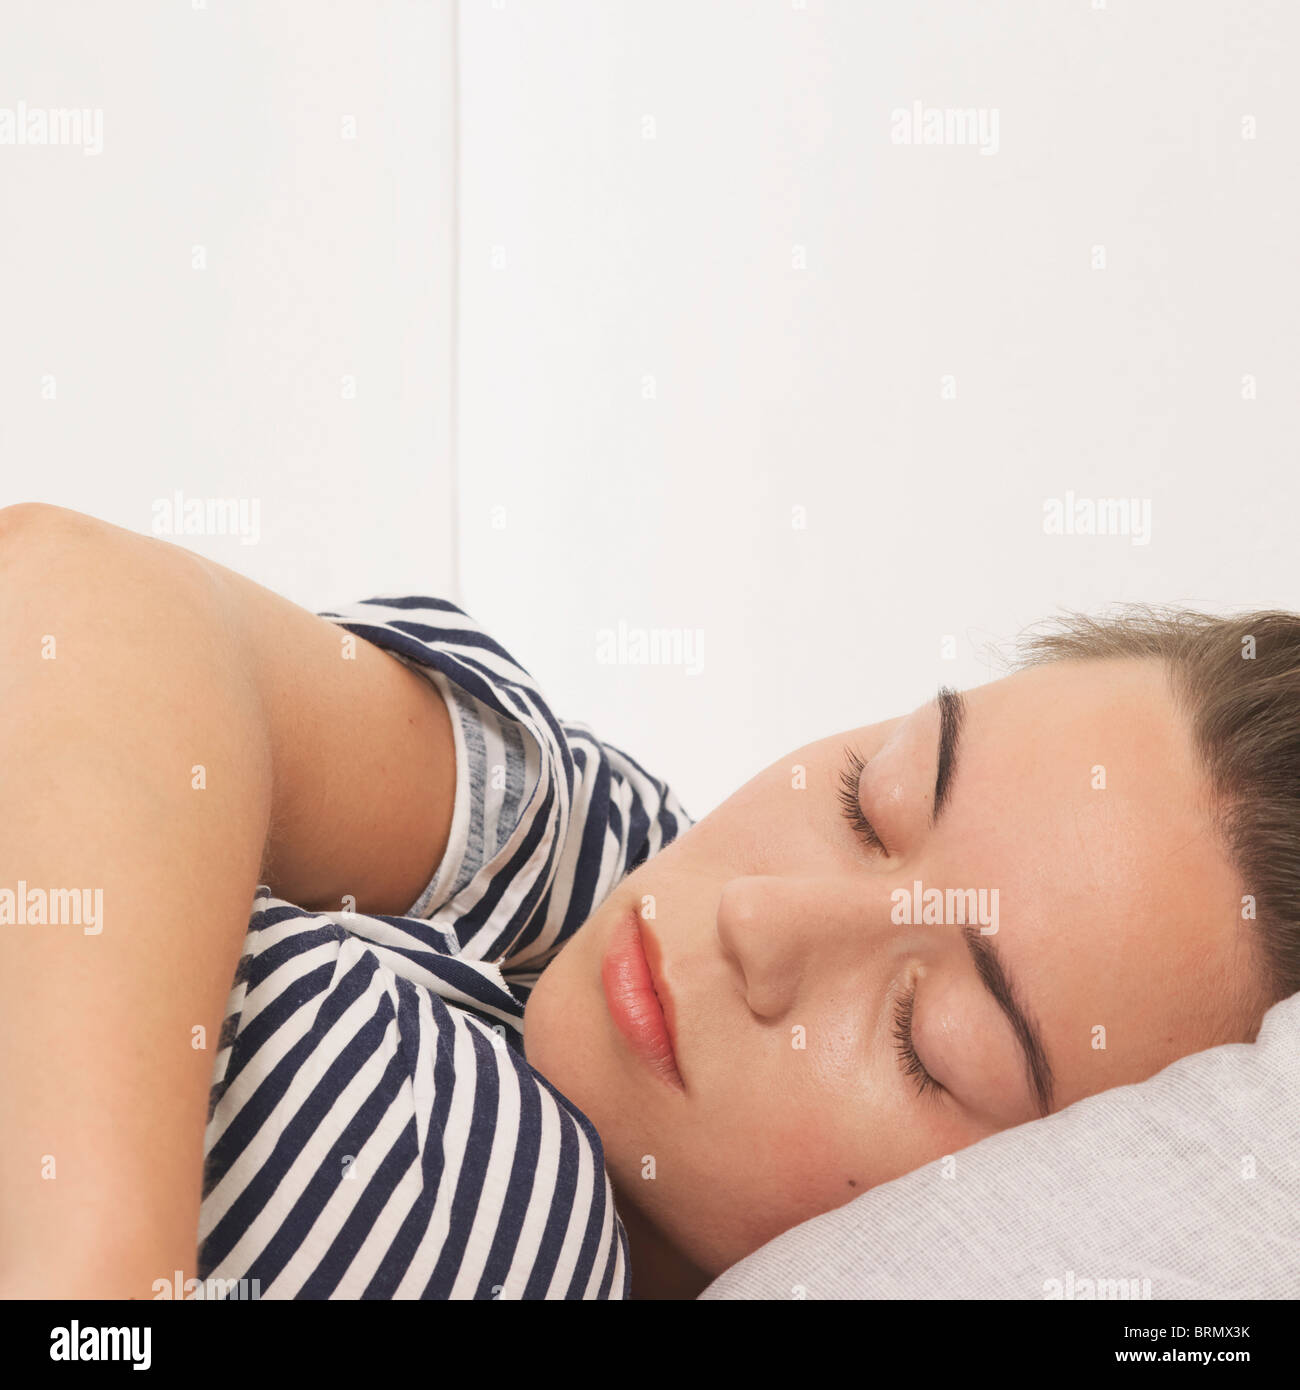 Woman reclined with eyes closed Stock Photo